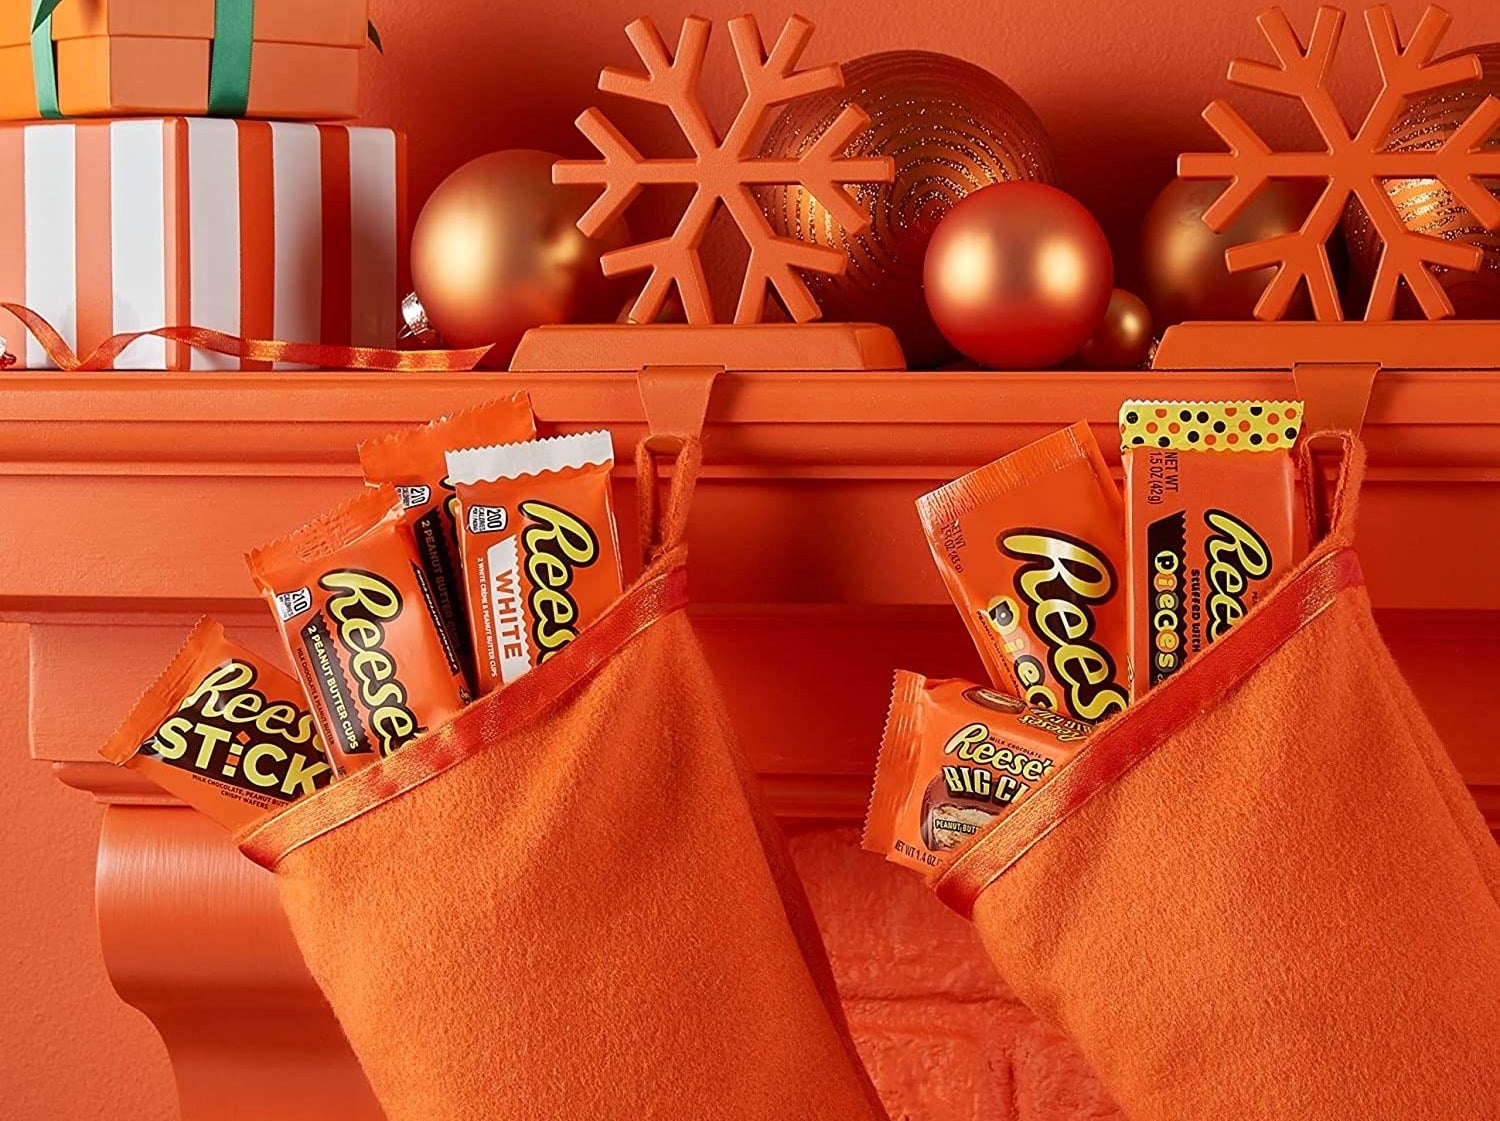 the contents of the variety pack inside orange stockings hanging on an orange mantel